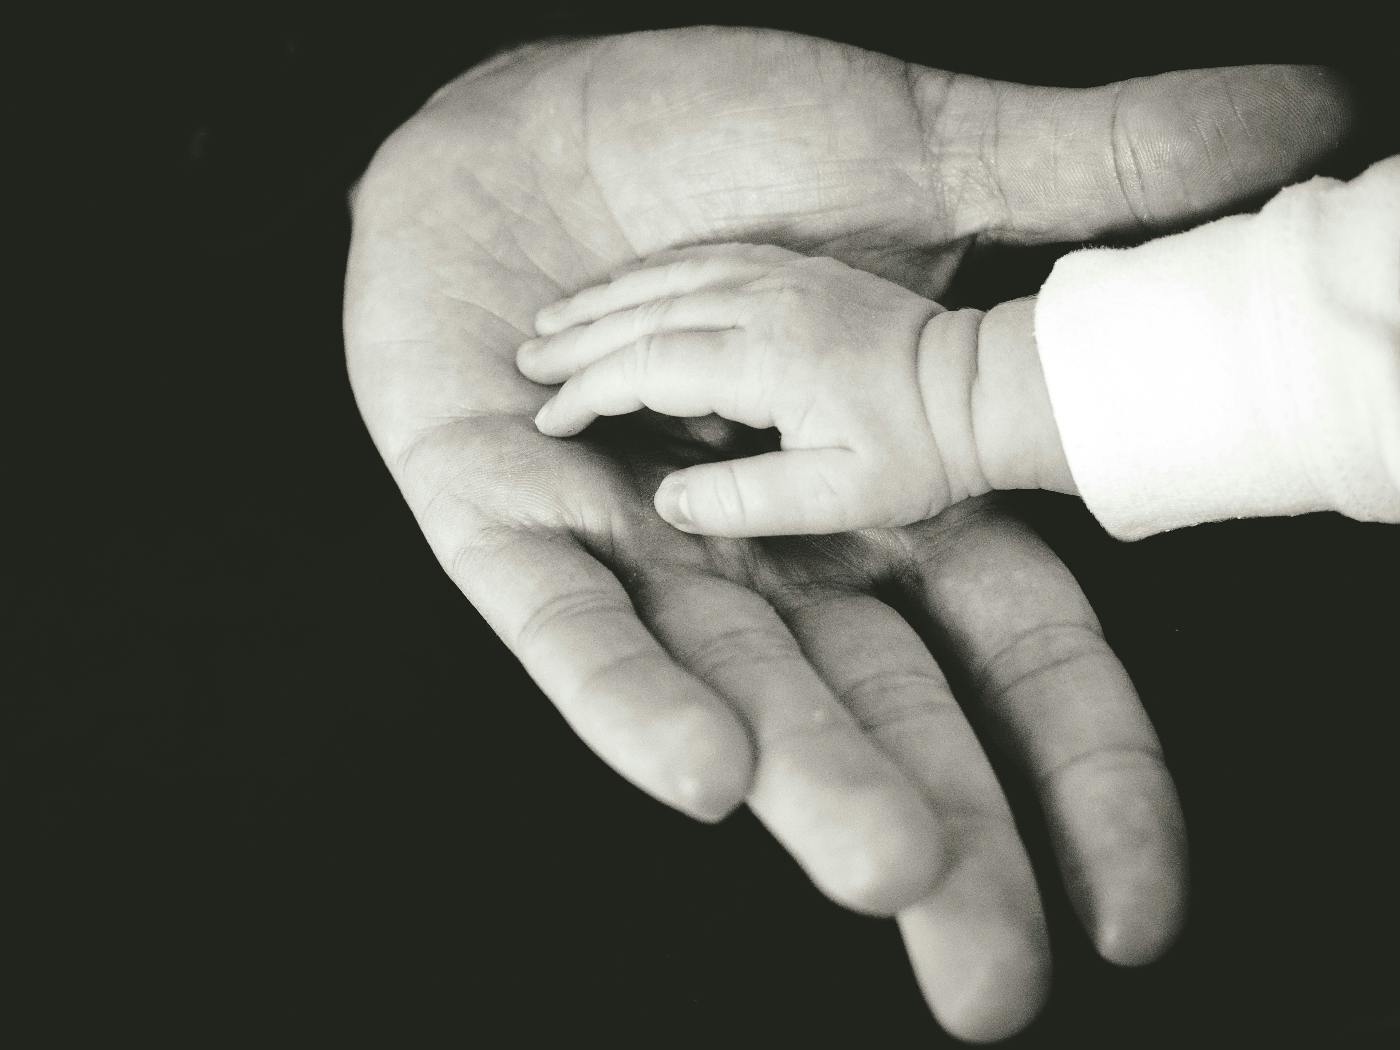 a child's hand in the palm of an adult's hand